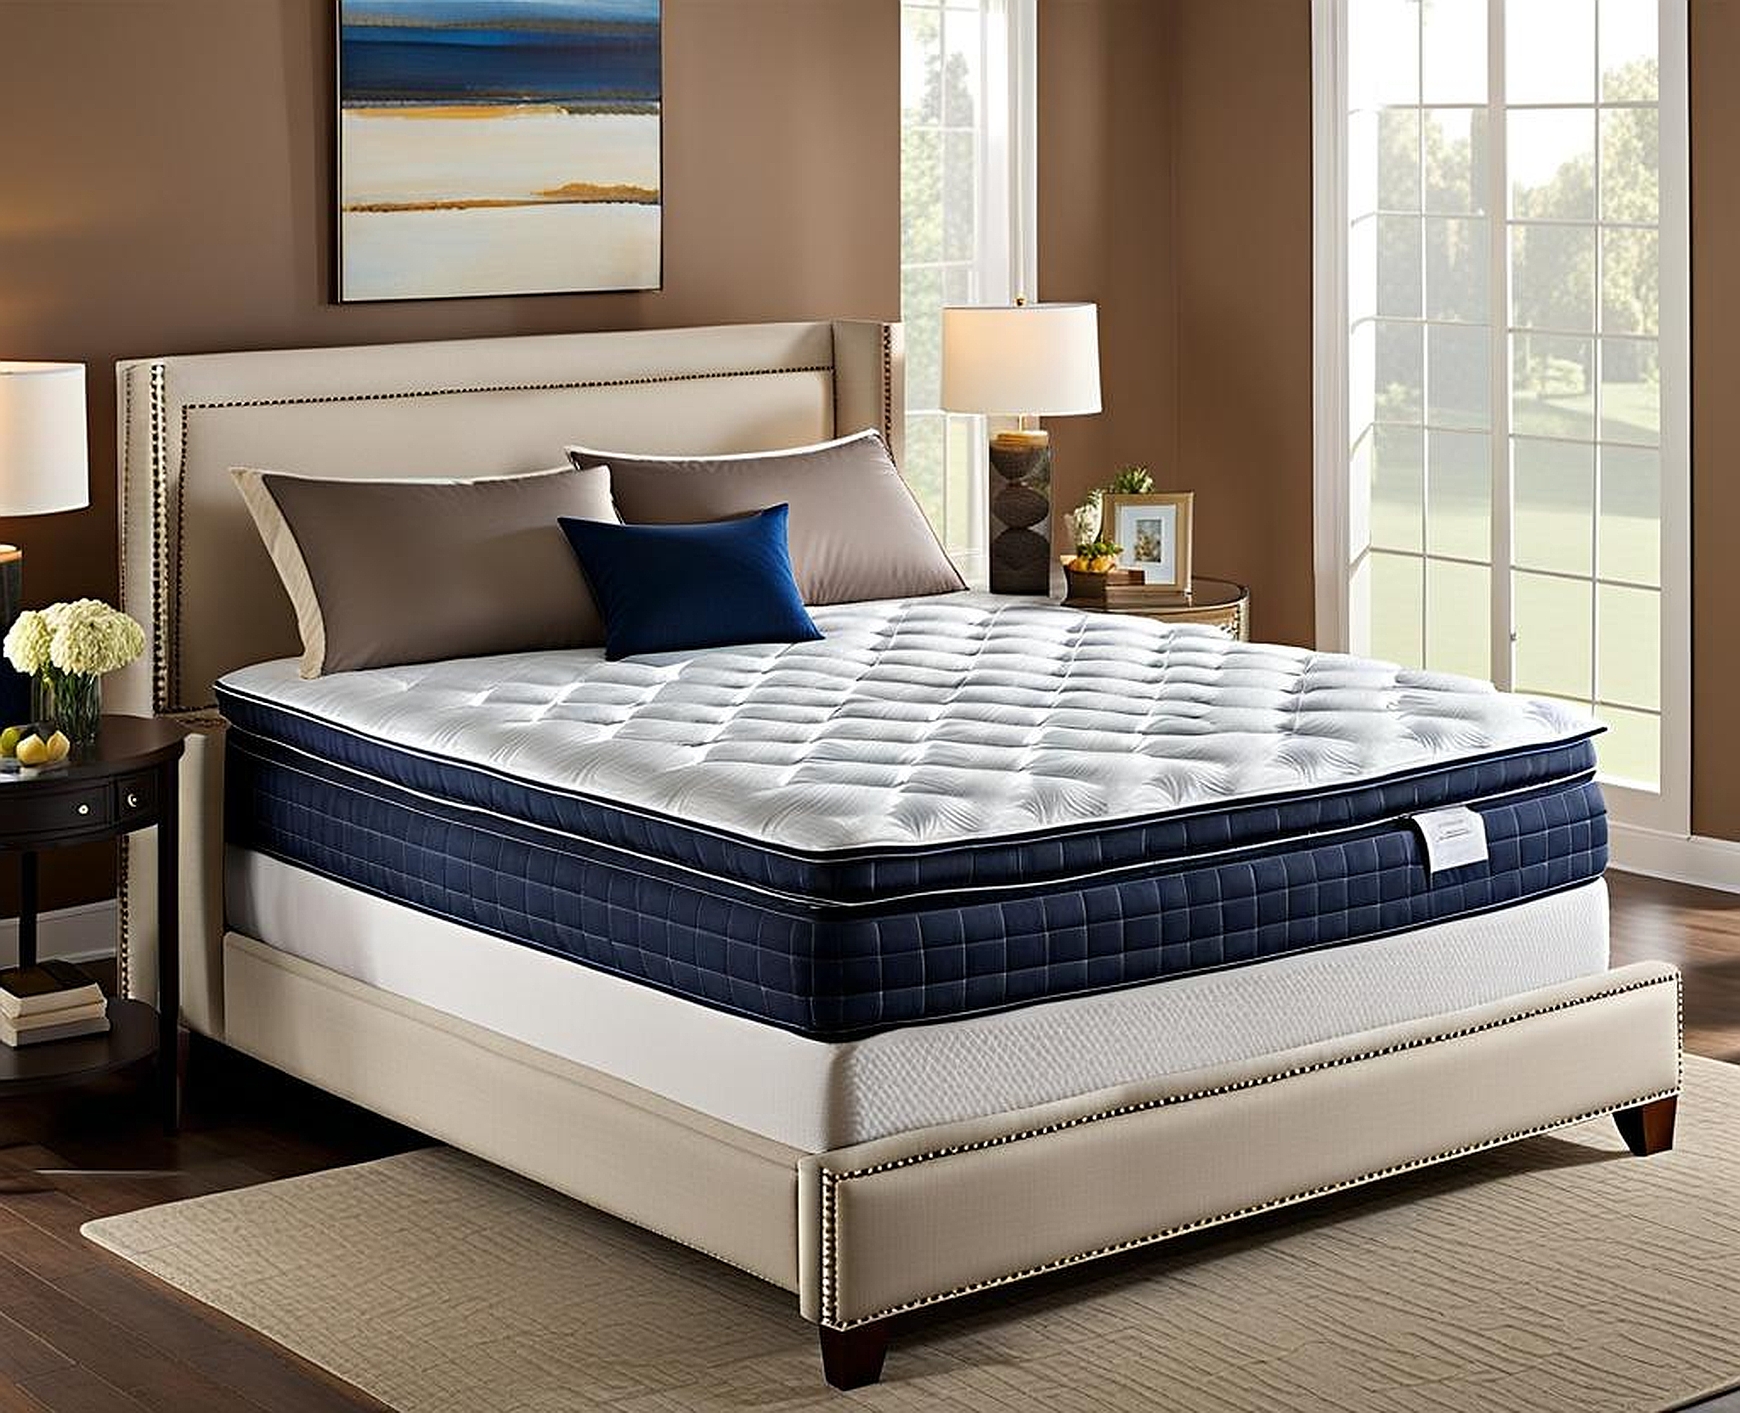 The Ultimate Guide to Pillow Top Mattress Pros and Cons for Side Sleepers